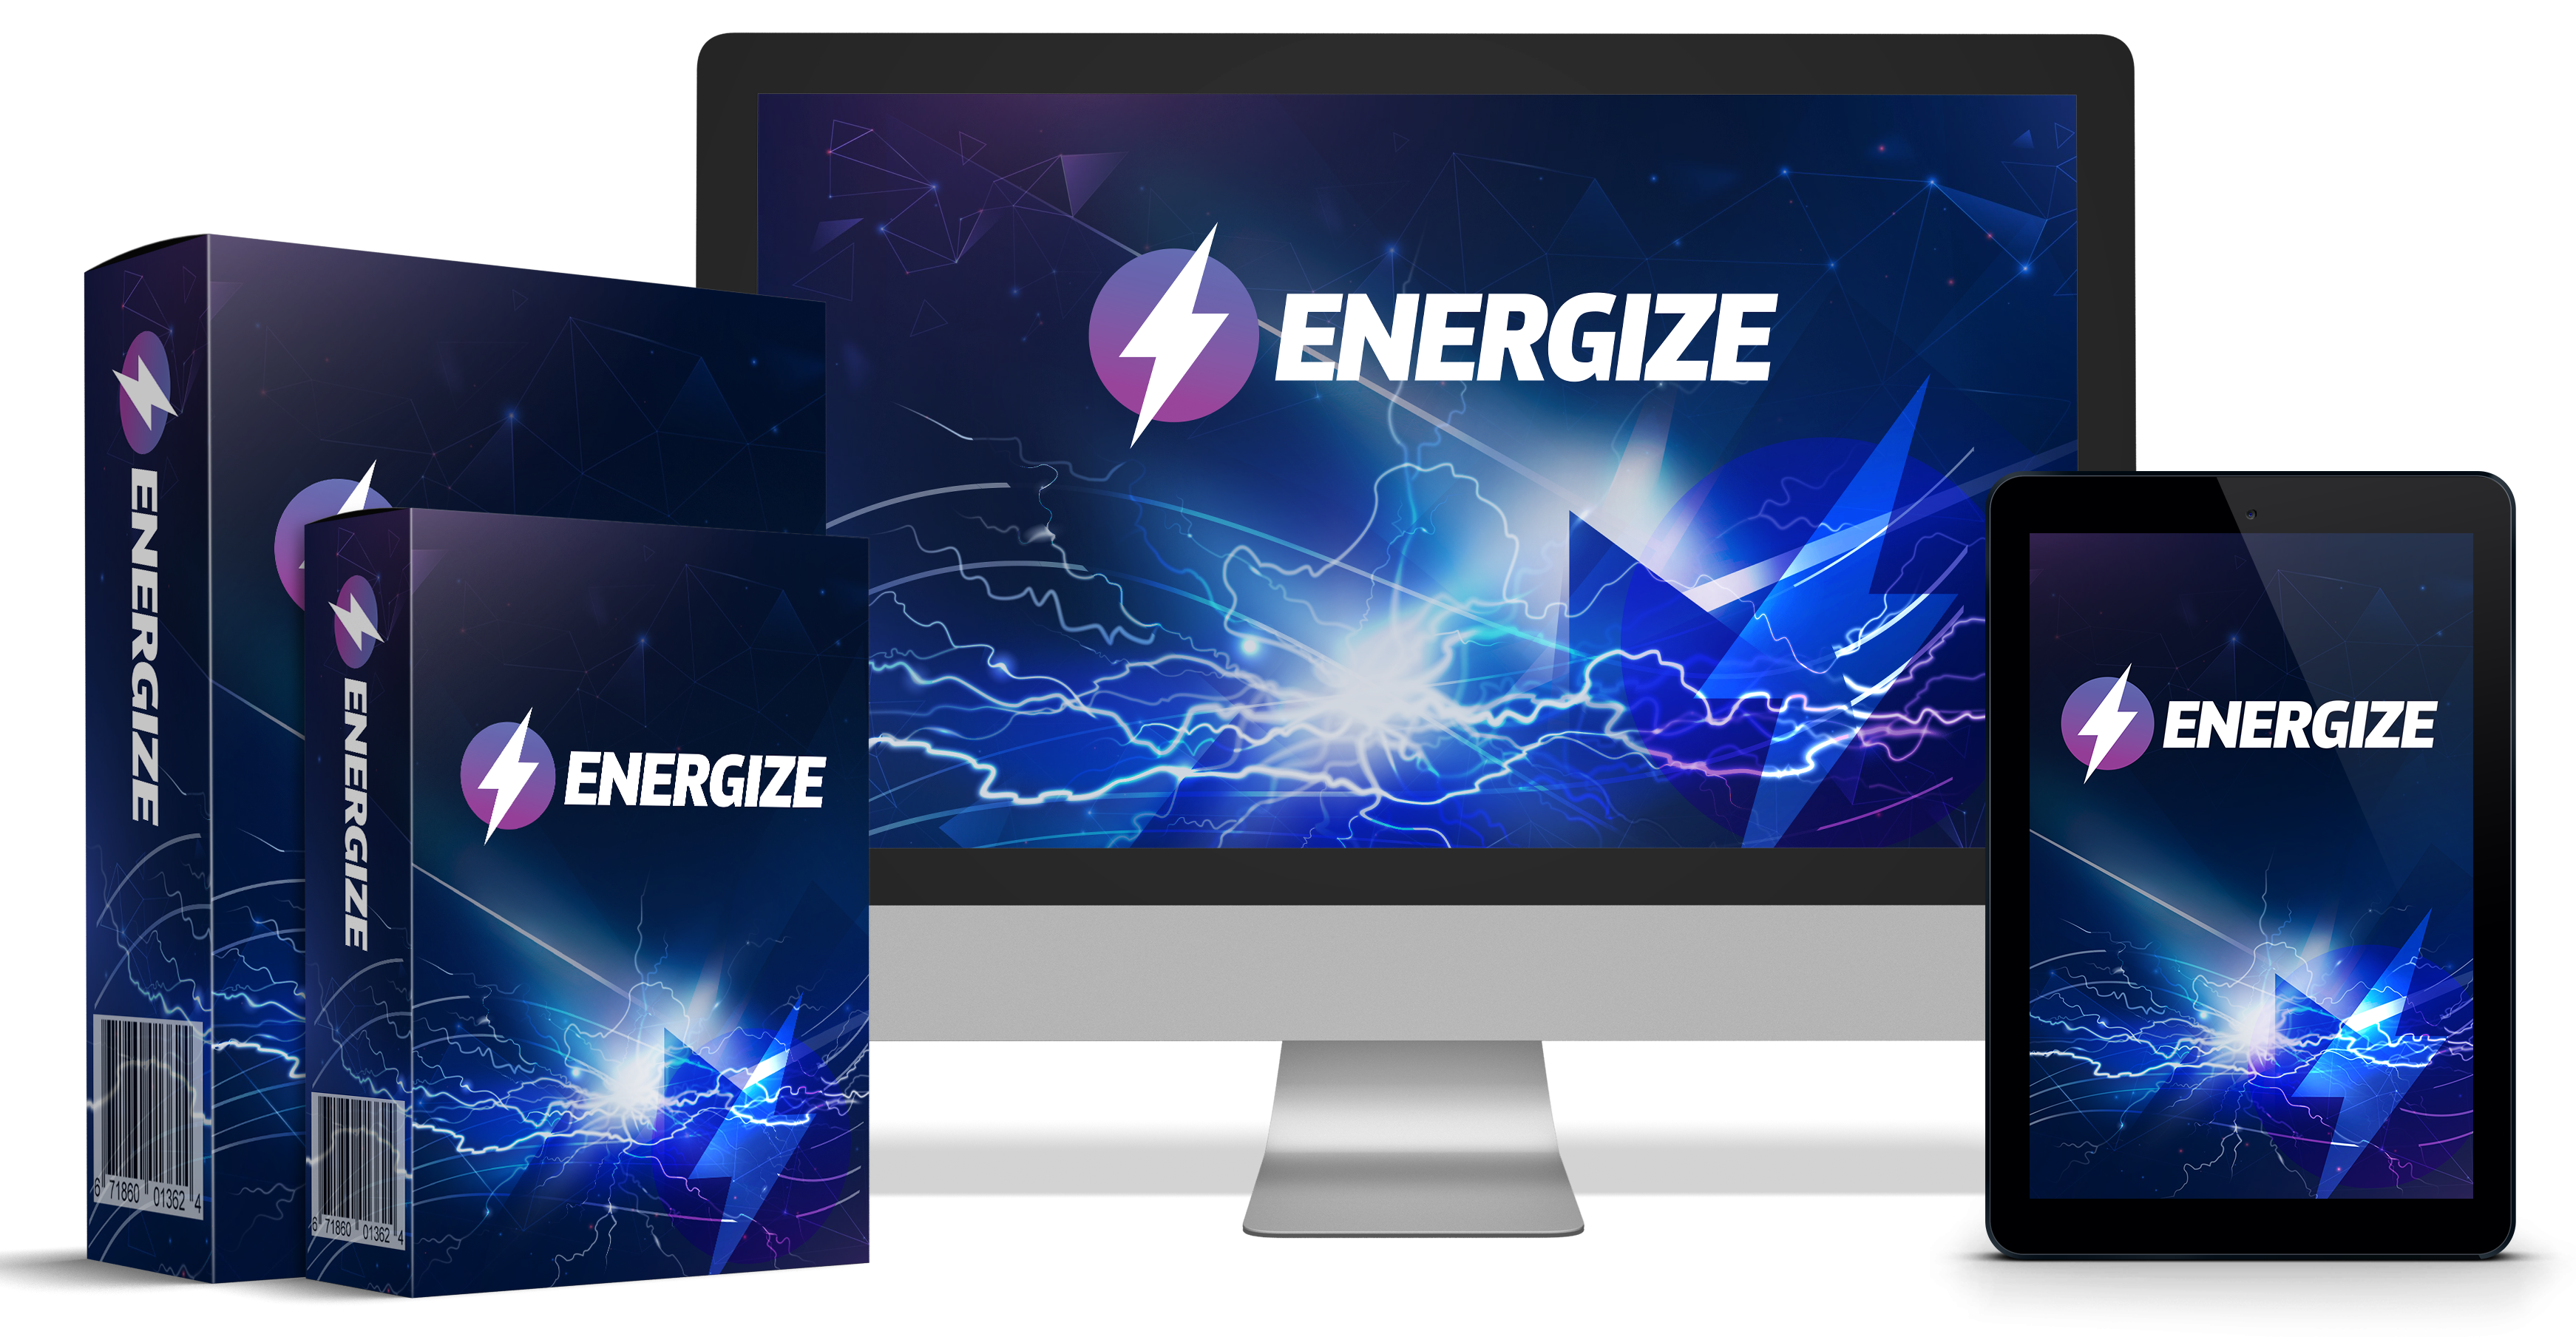 Energize Review- Is it worth Buying or Is it just a Scam?